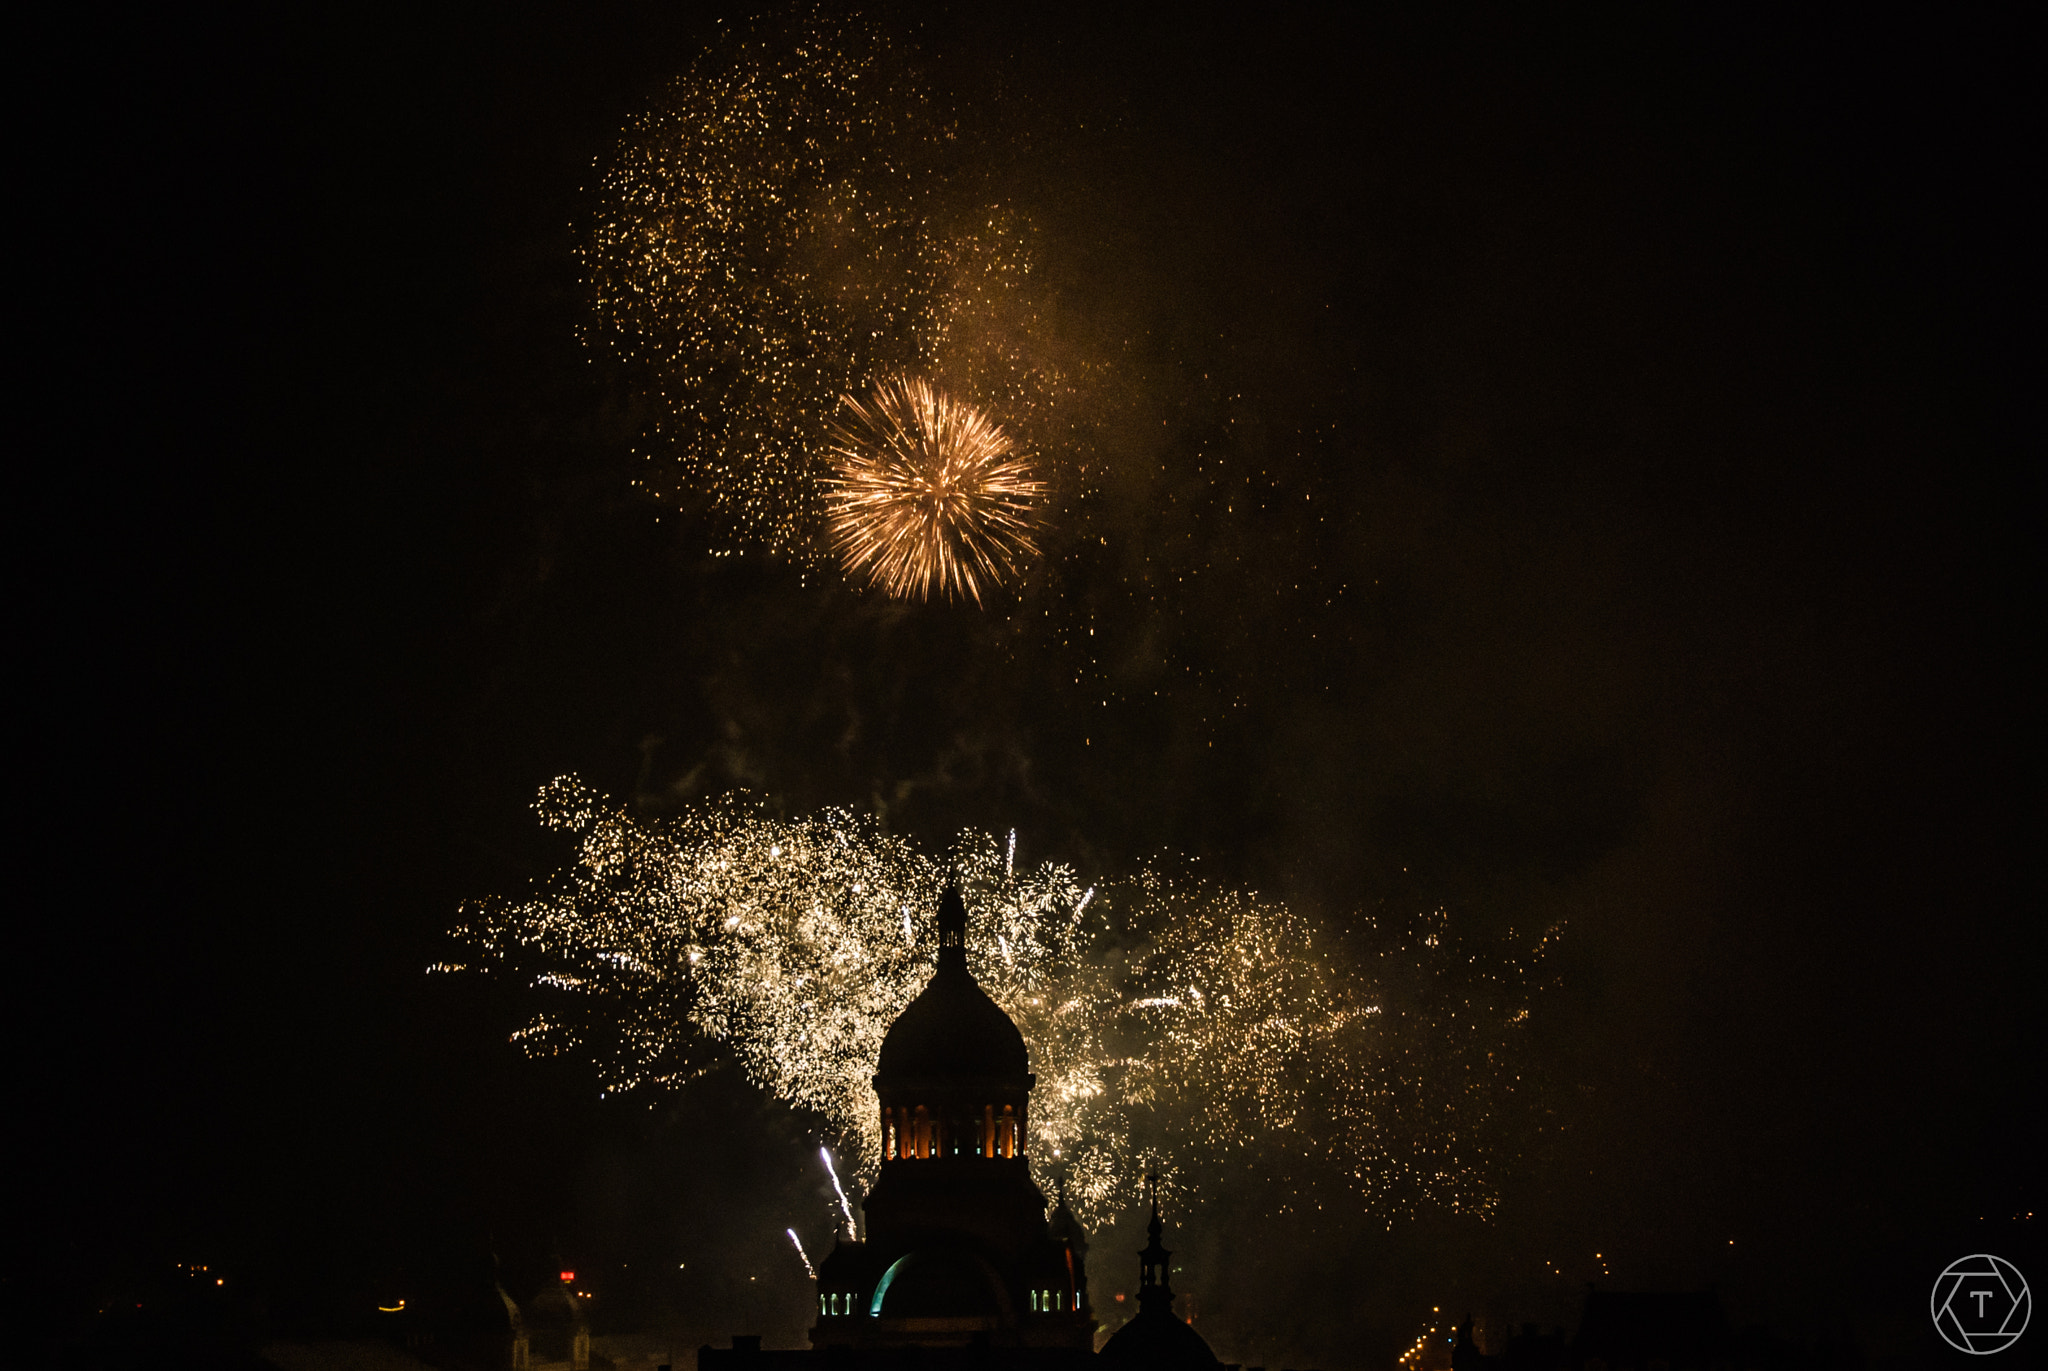 Nikon D80 sample photo. First of december fireworks photography